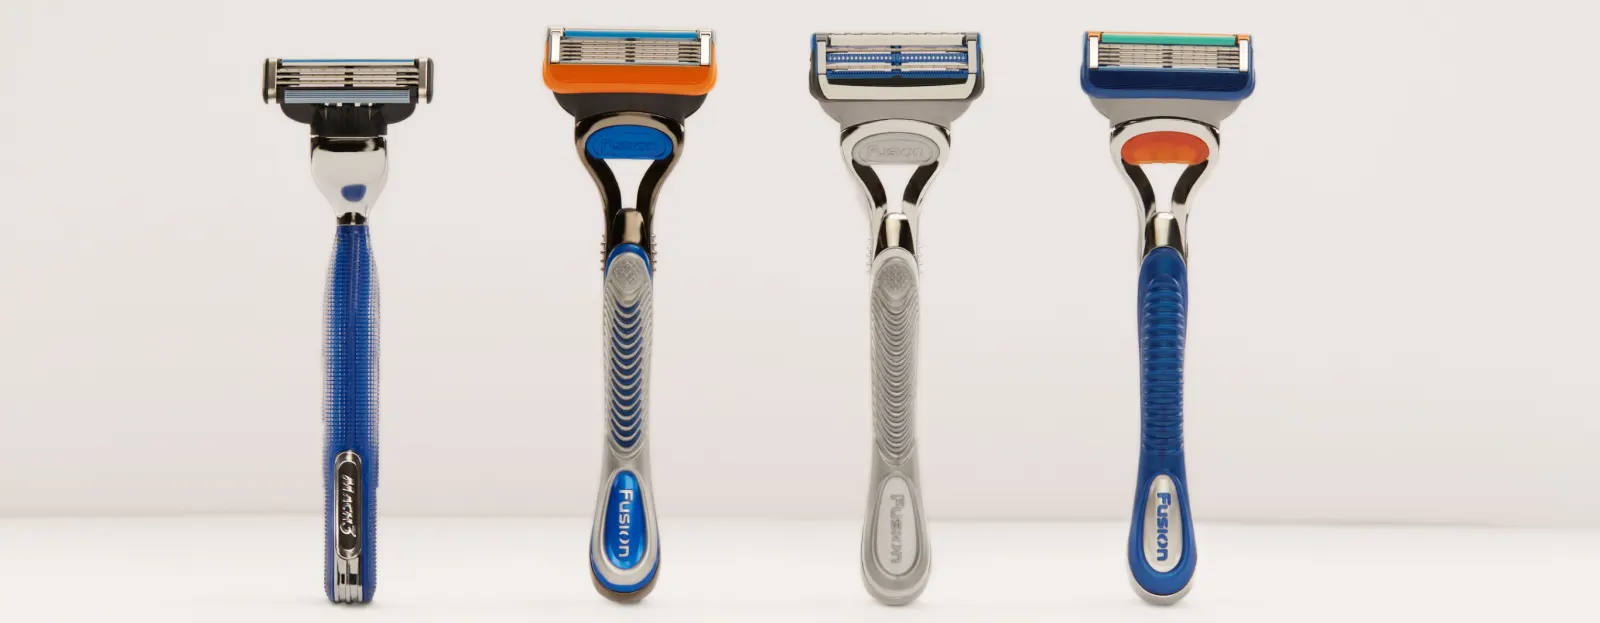 Customizing your shave and learn how to choose a razor